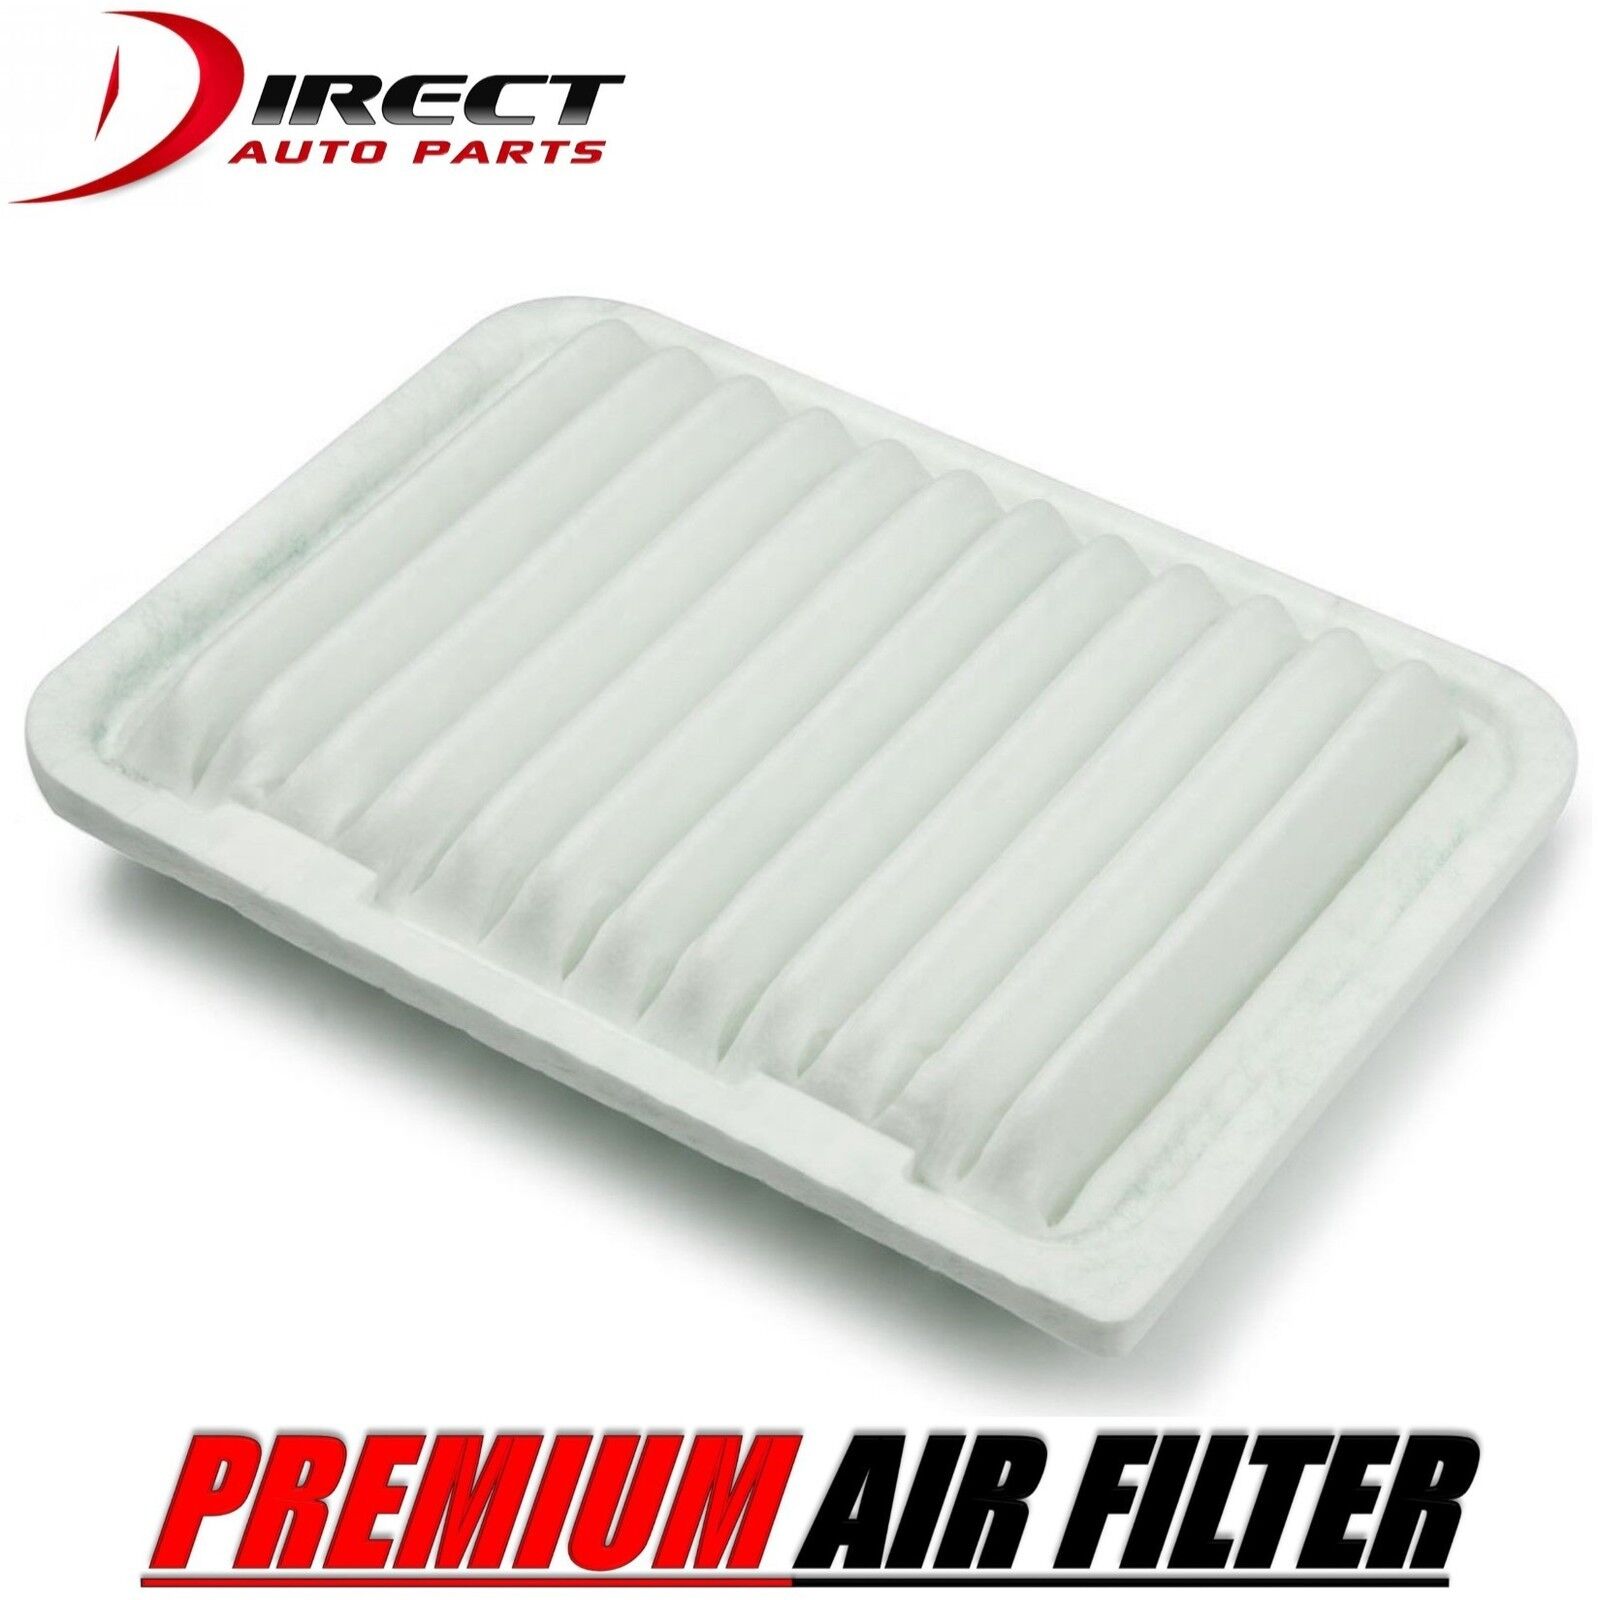 AIR FILTER FOR LEXUS RX330 3.3L ENGINE 2004 - 2006